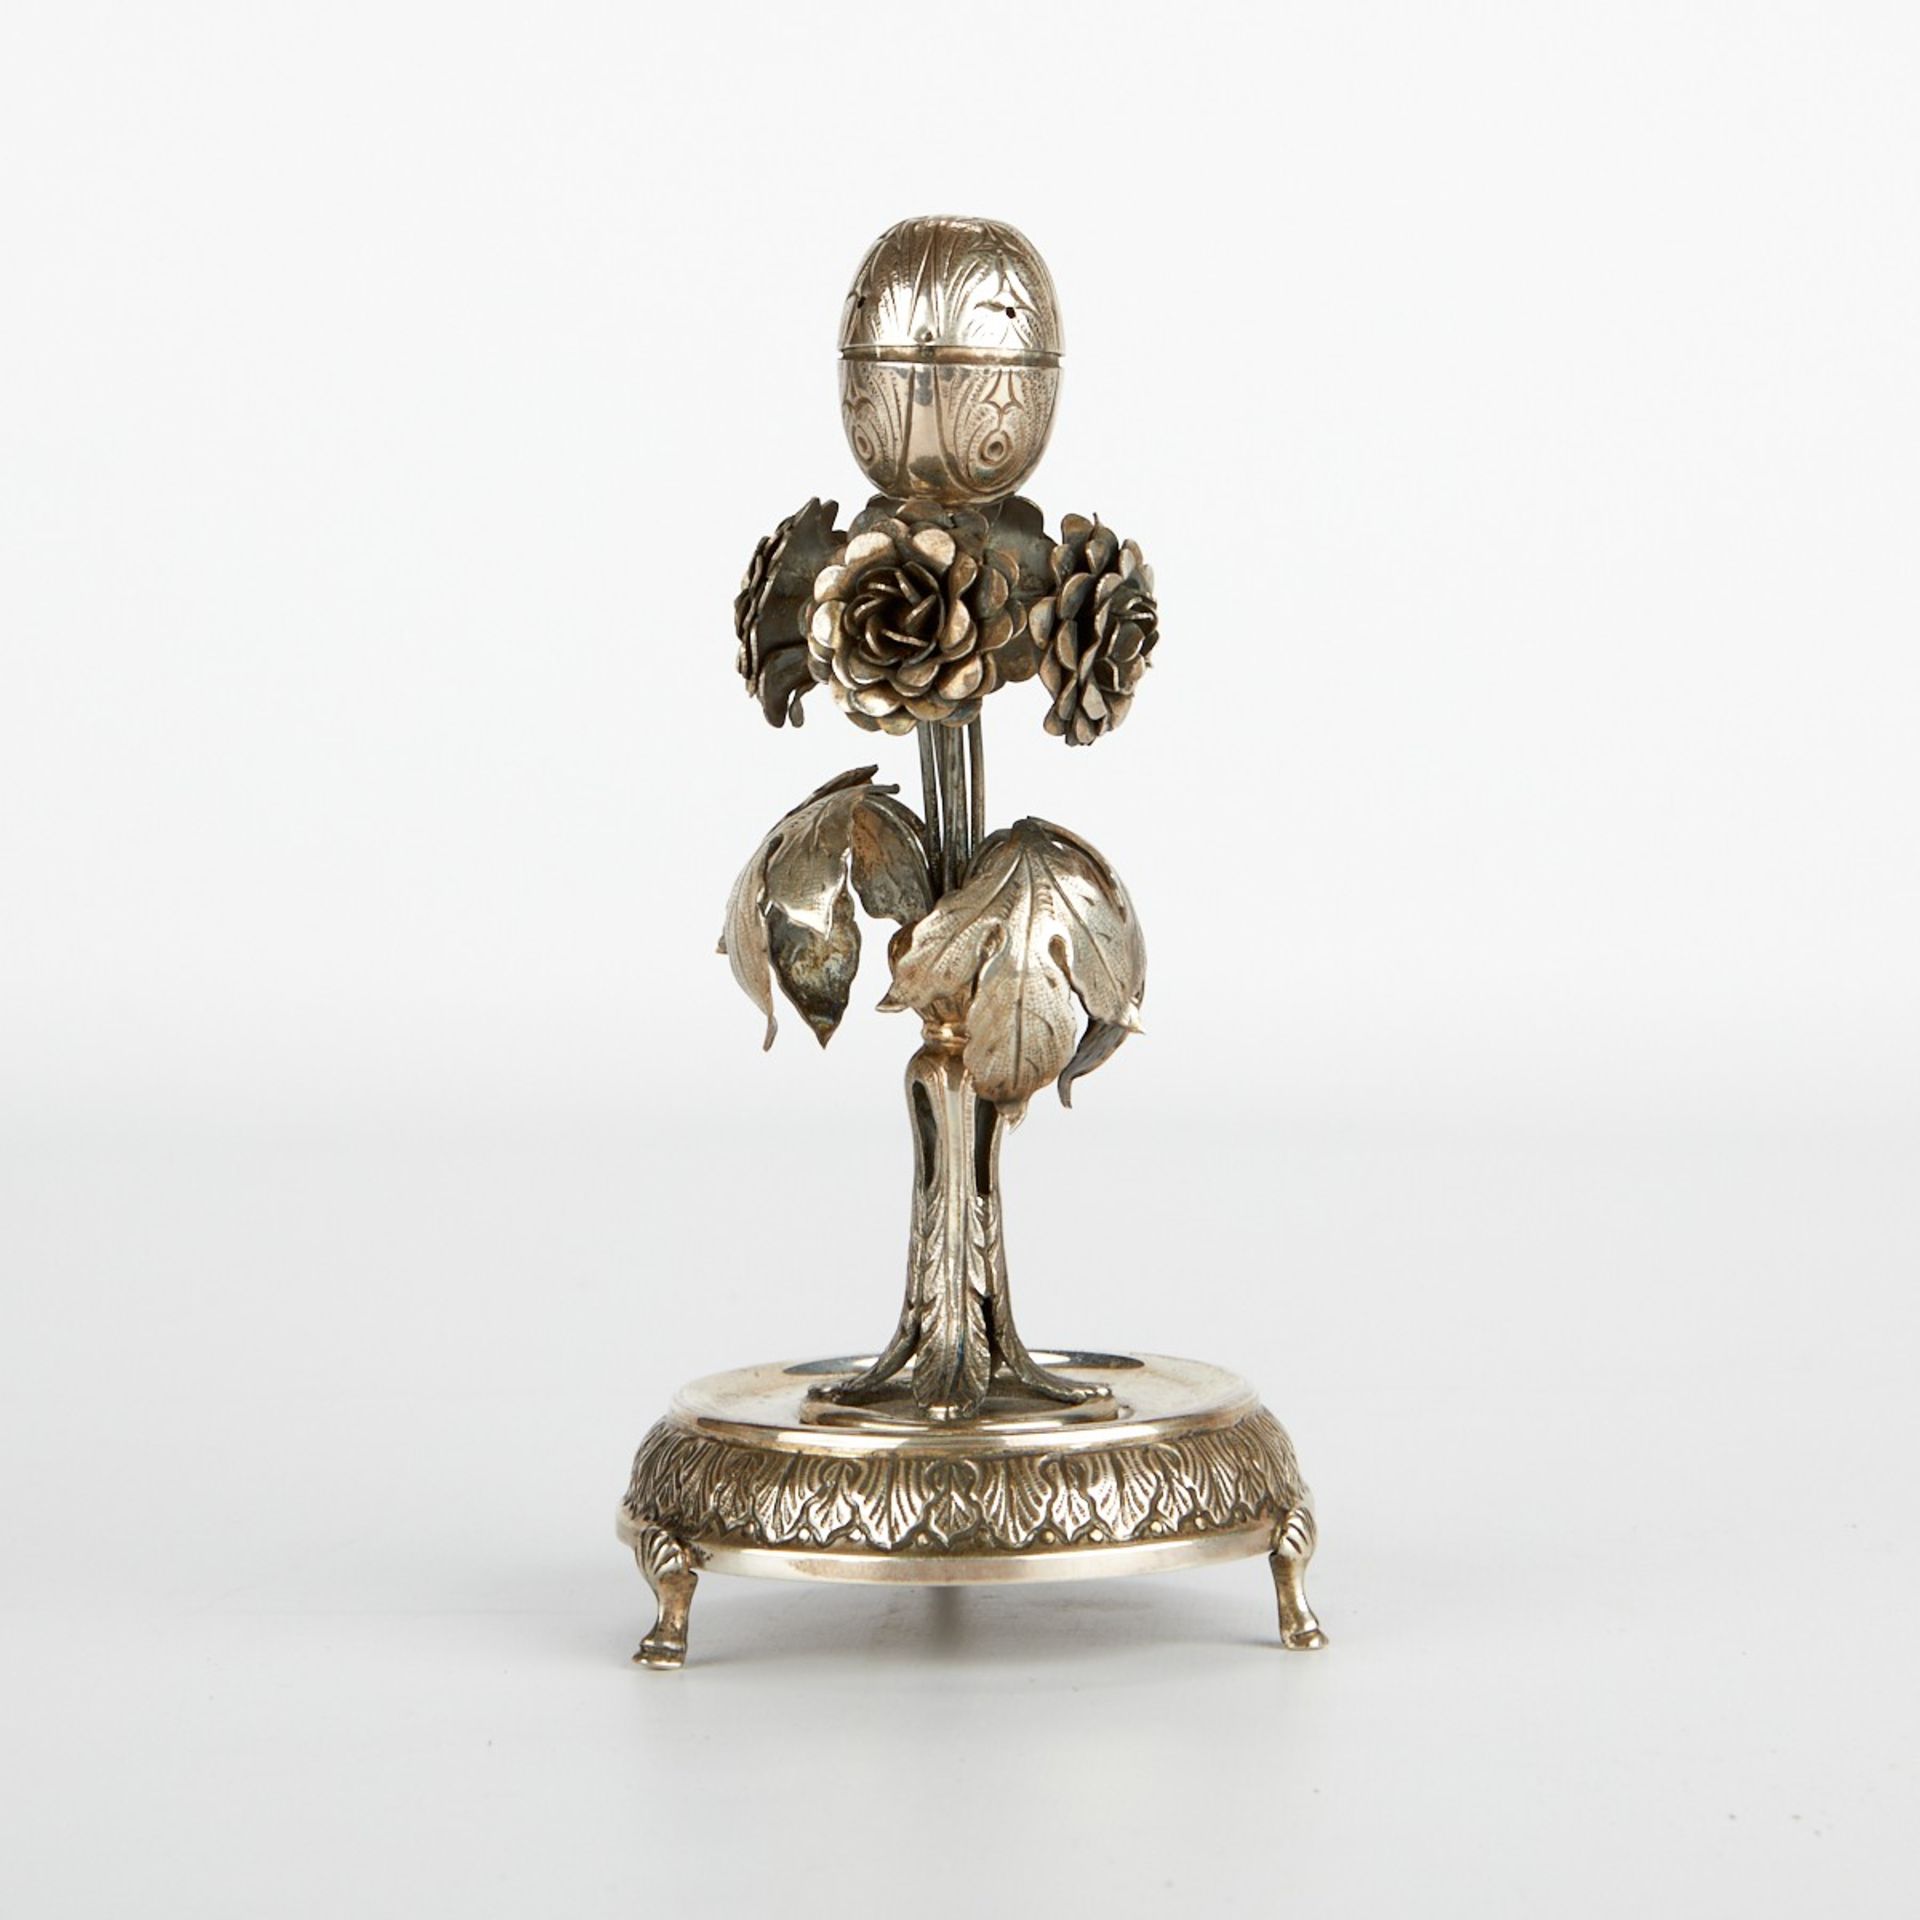 Sterling Silver Floral Judaic Spice Tower - Image 3 of 8